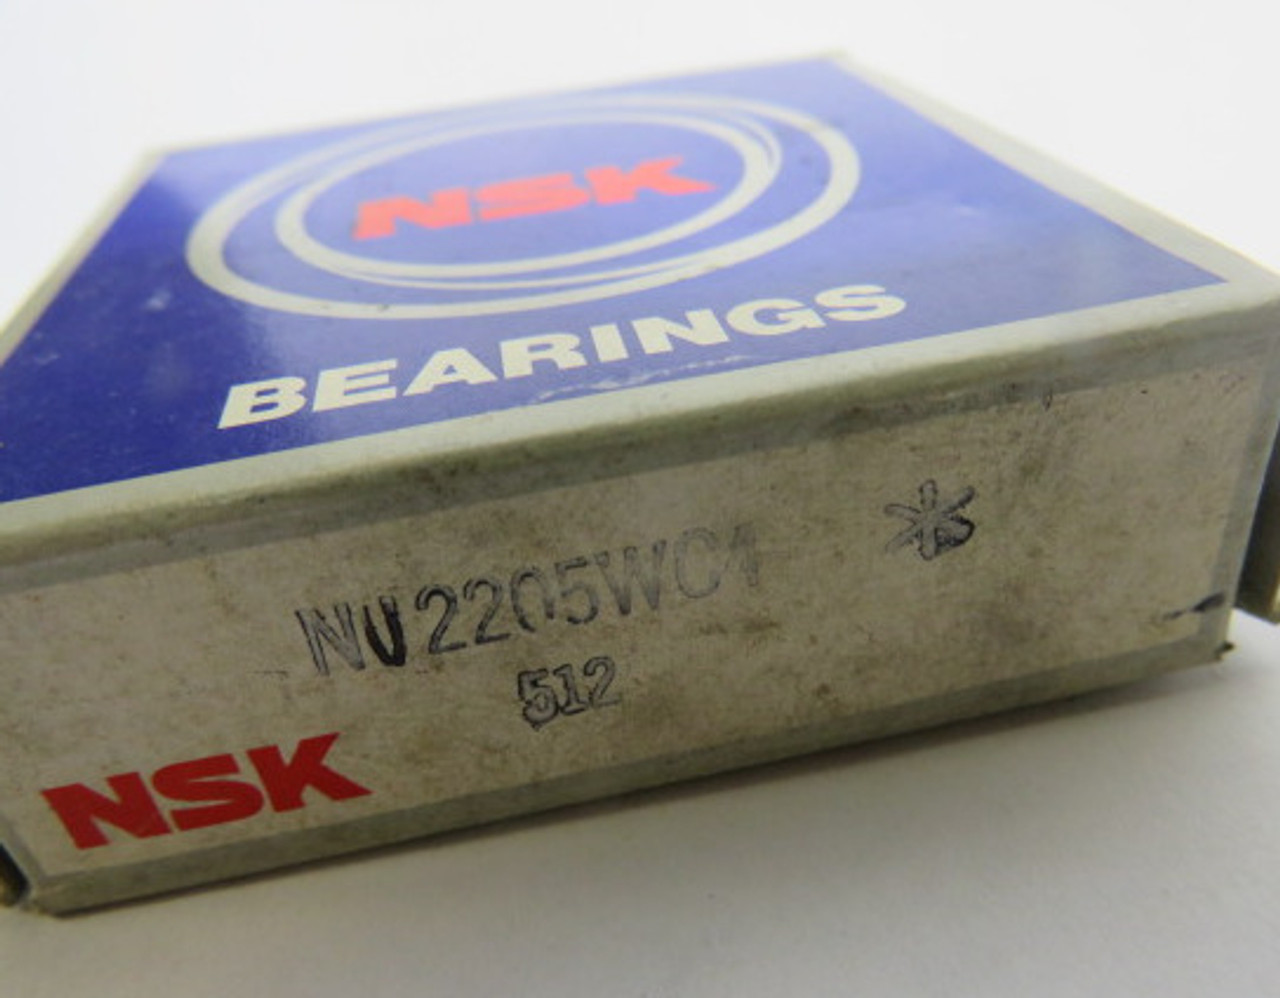 NSK NU2205WC4 Cylindrical Roller Bearing 52mmOD 25mmID 18mmW ! NEW !